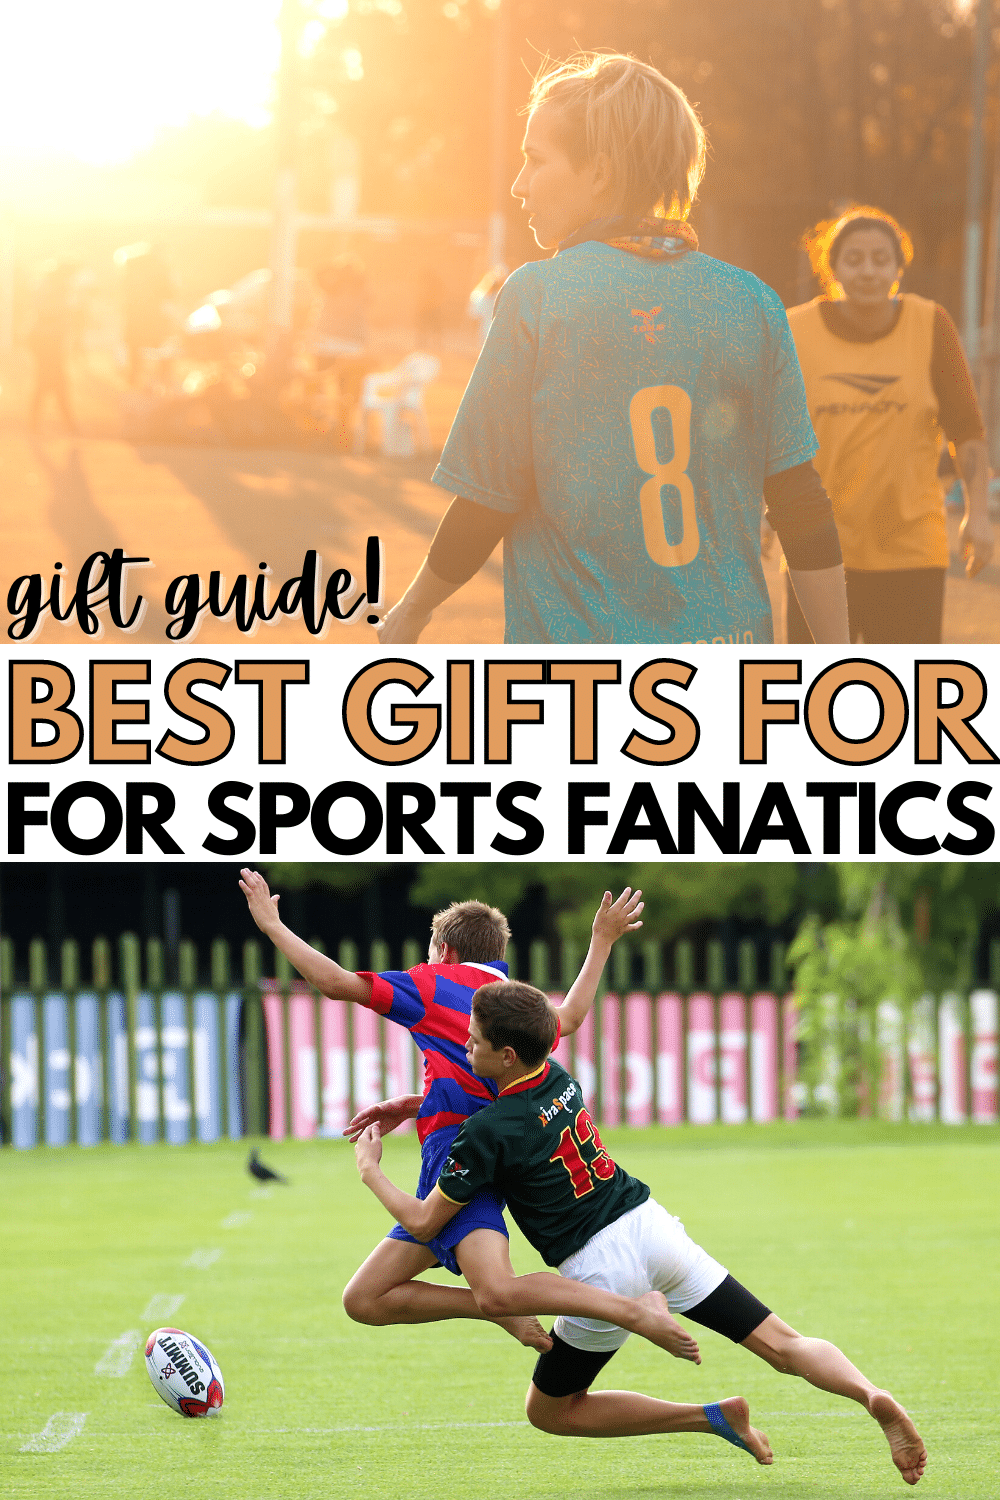 If you need to buy a gift for a huge sports fan, here's a list of the best gifts for sports fanatics. There's things for game day and to show team spirit. #sportsfan #giftguide #giftideas #sportsfanatic via @wondermomwannab